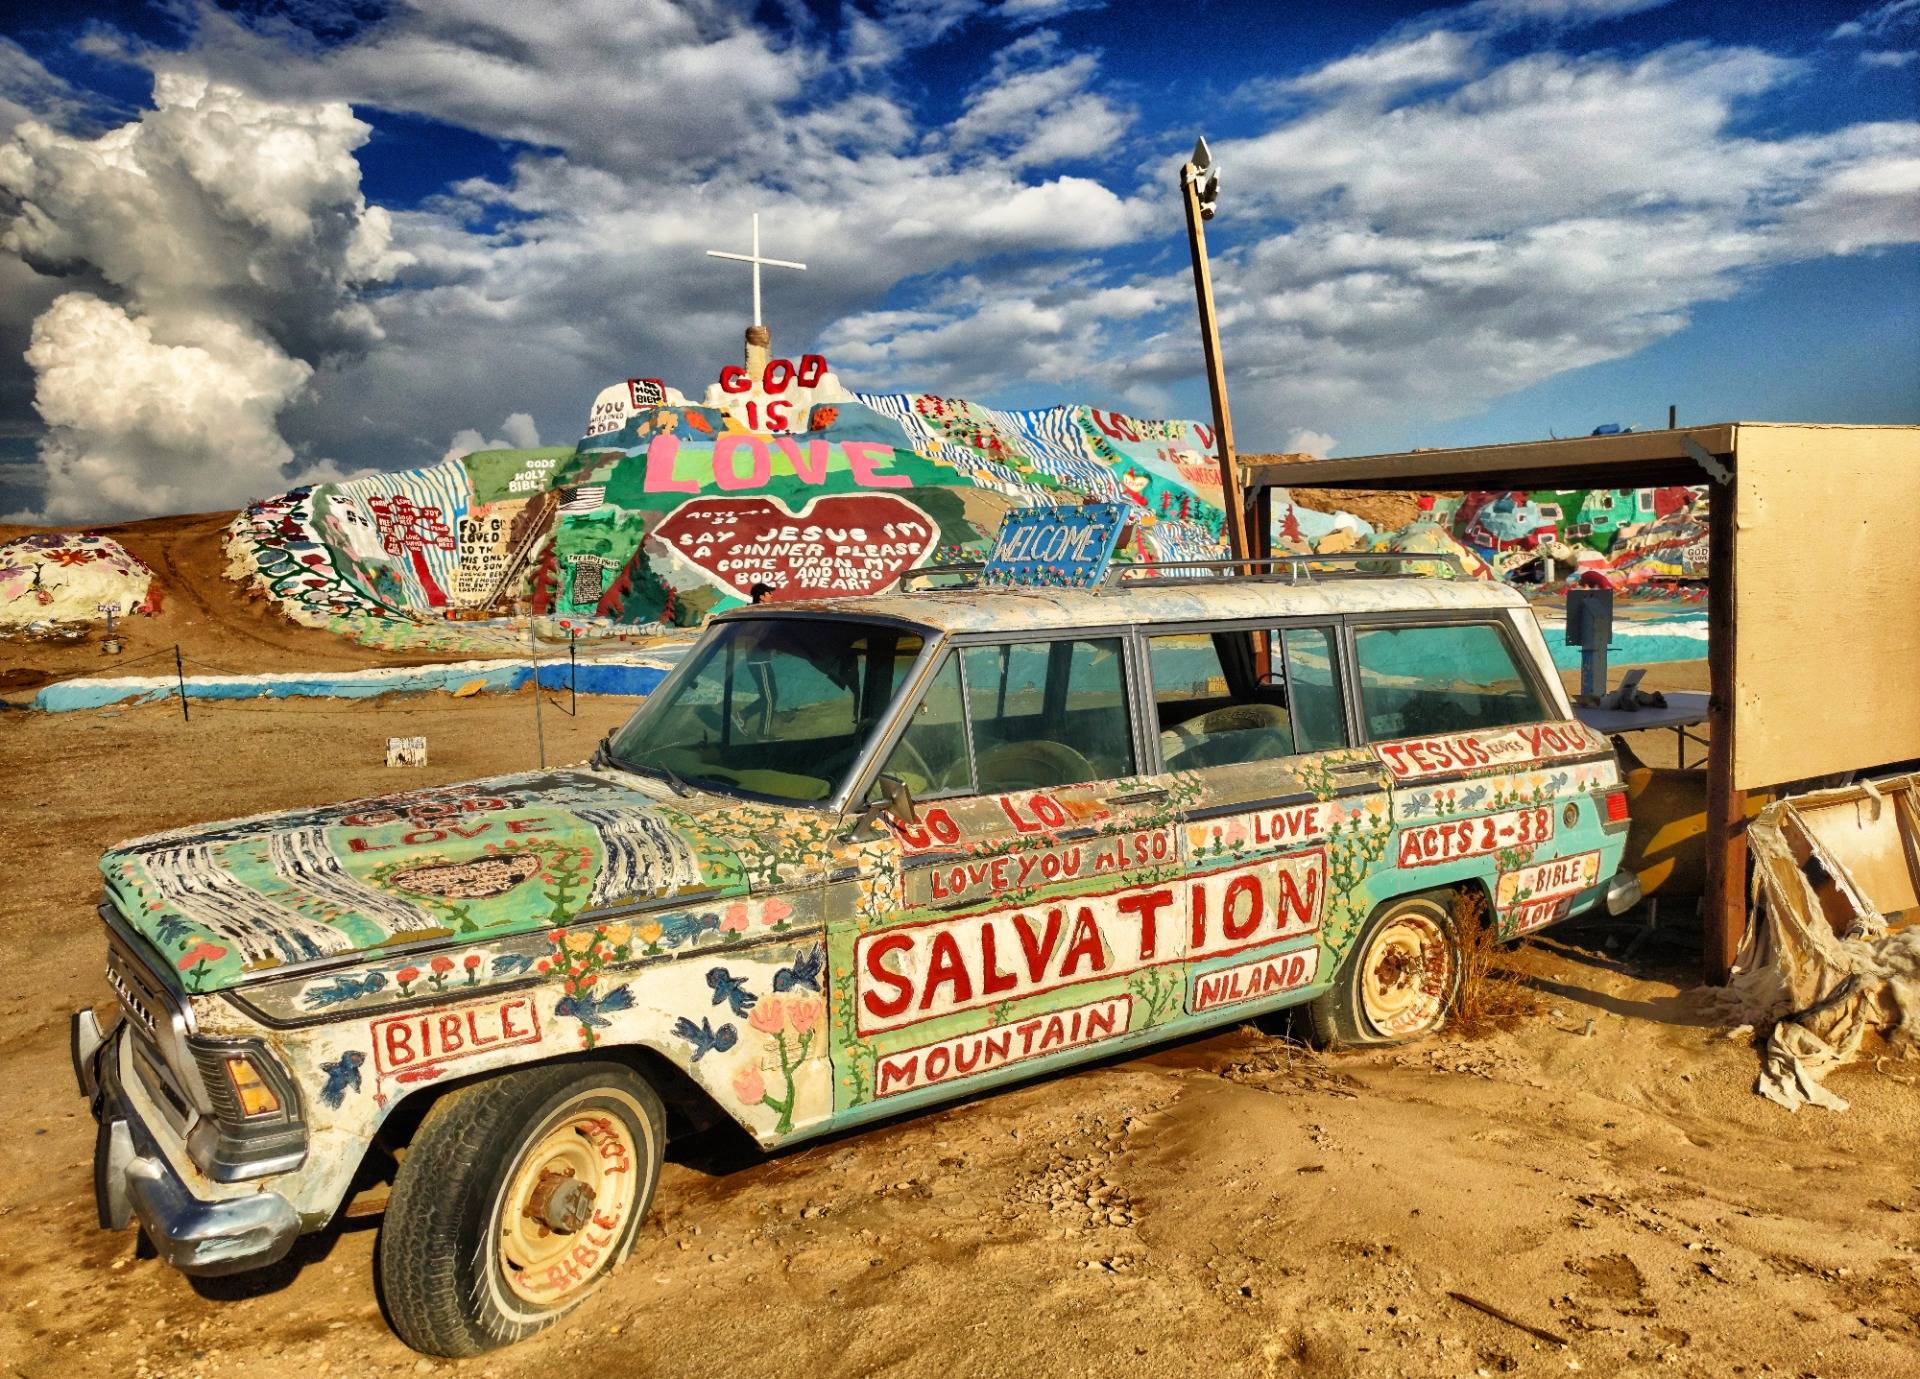 Salvation Mountain: The man who made a hill for god